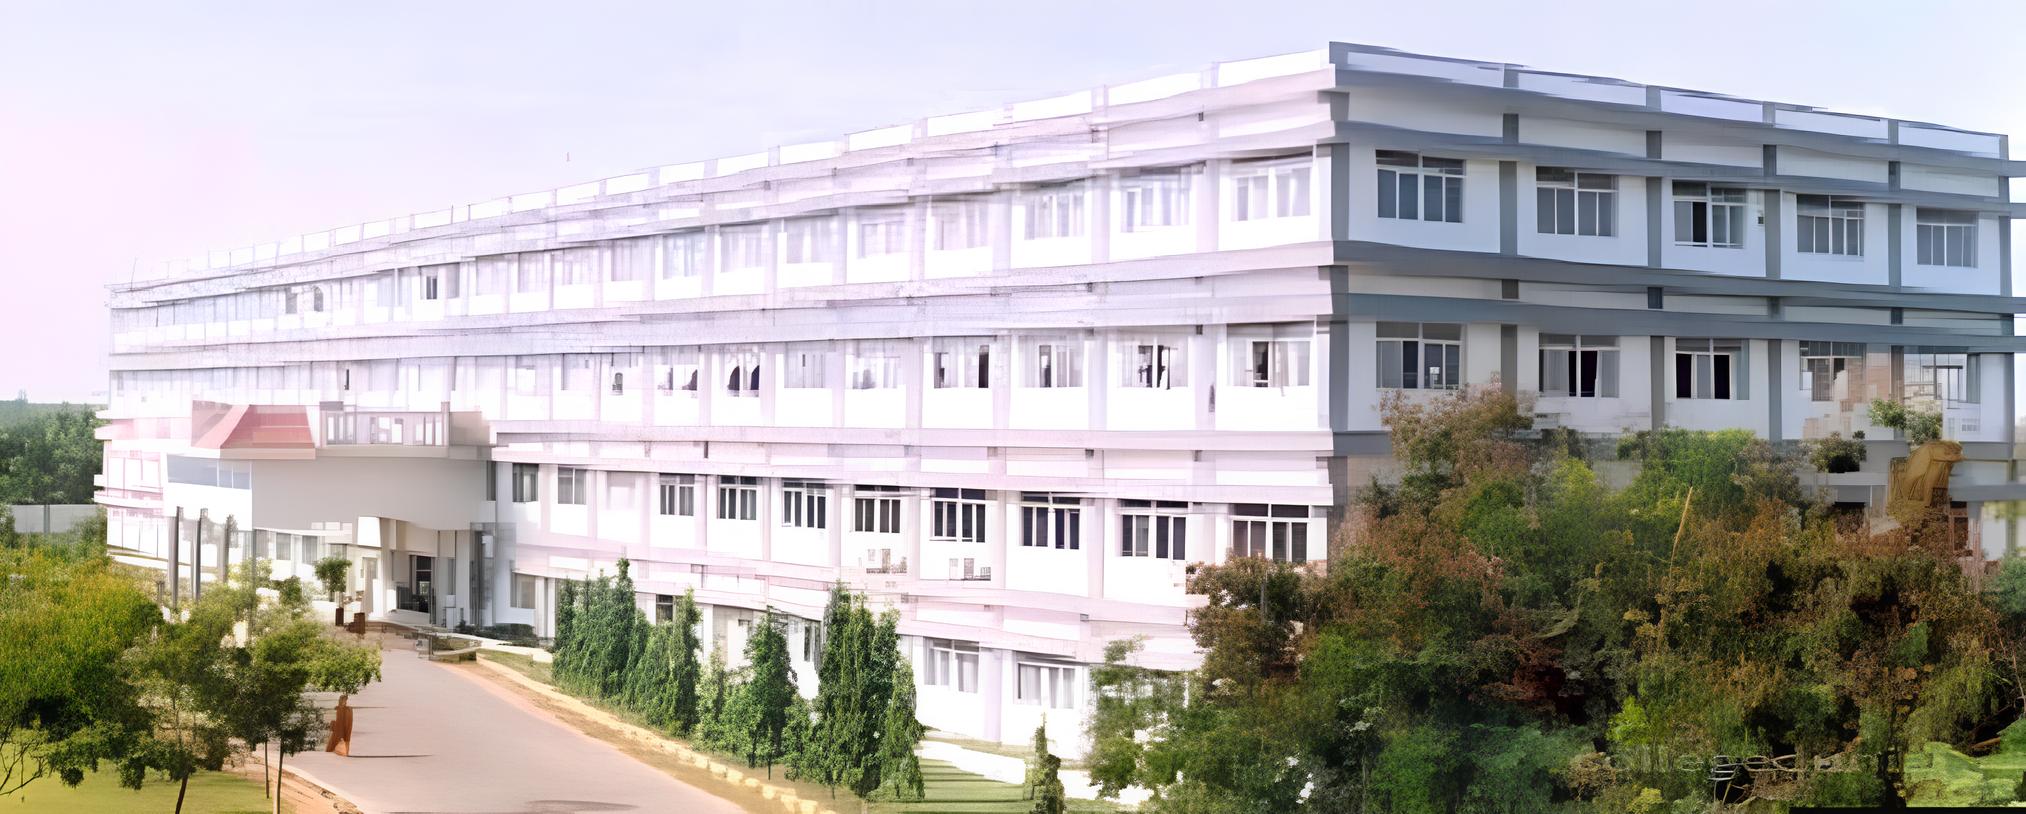 Narayana Dental College and Hospital Nellore Admission, Courses Offered, Fees structure, Placements, Facilities